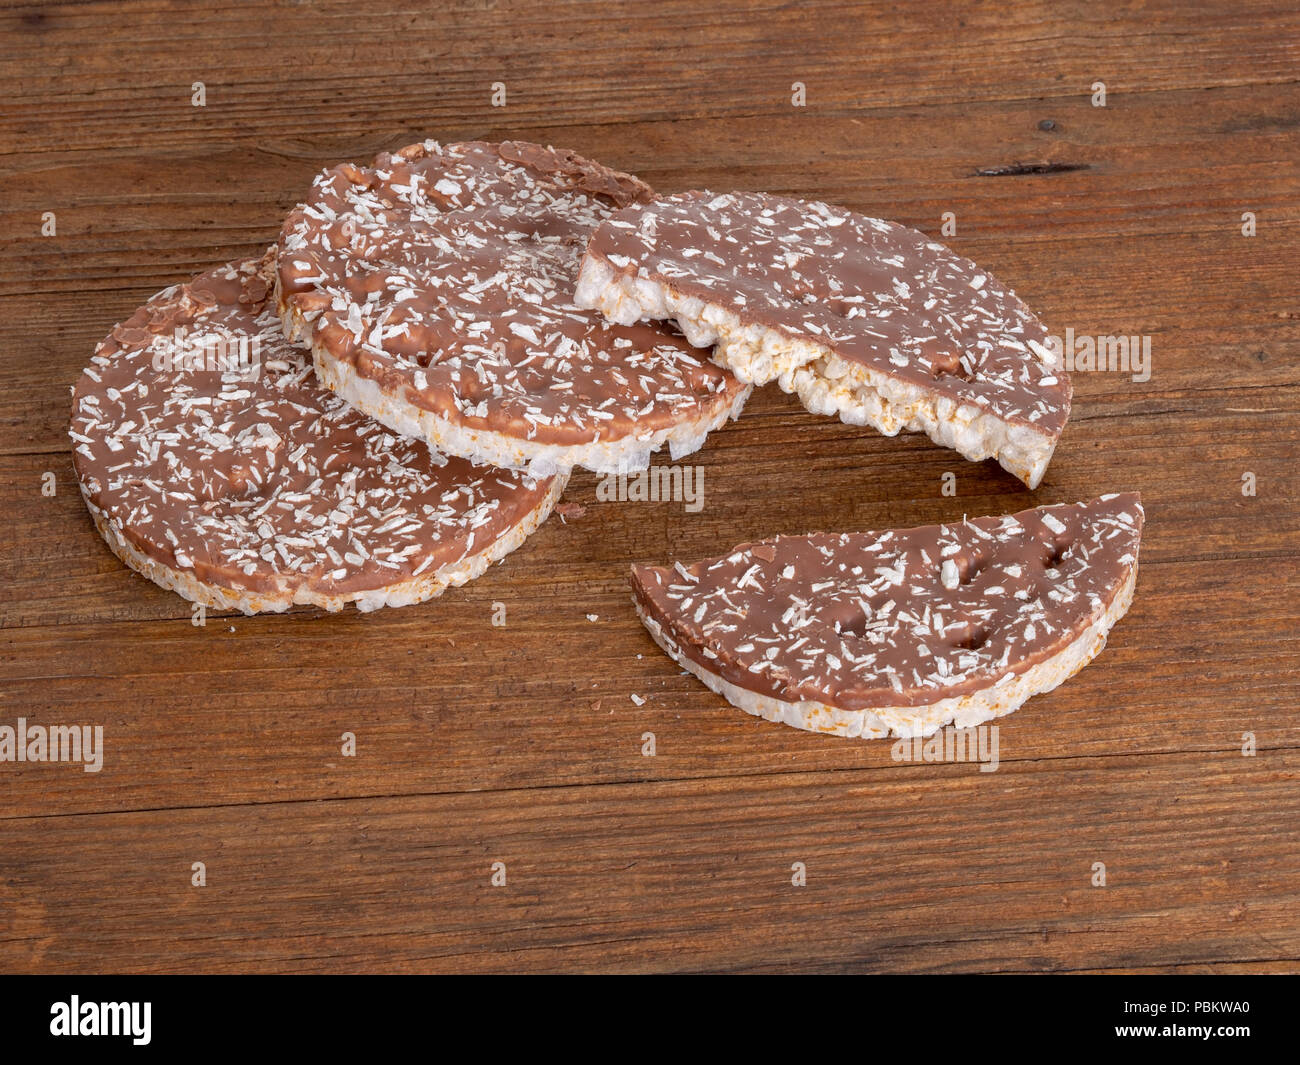 Rice cakes, crackers with milk chocolate and coconut on naturalwood board. Healthy crunchy treat. Stock Photo